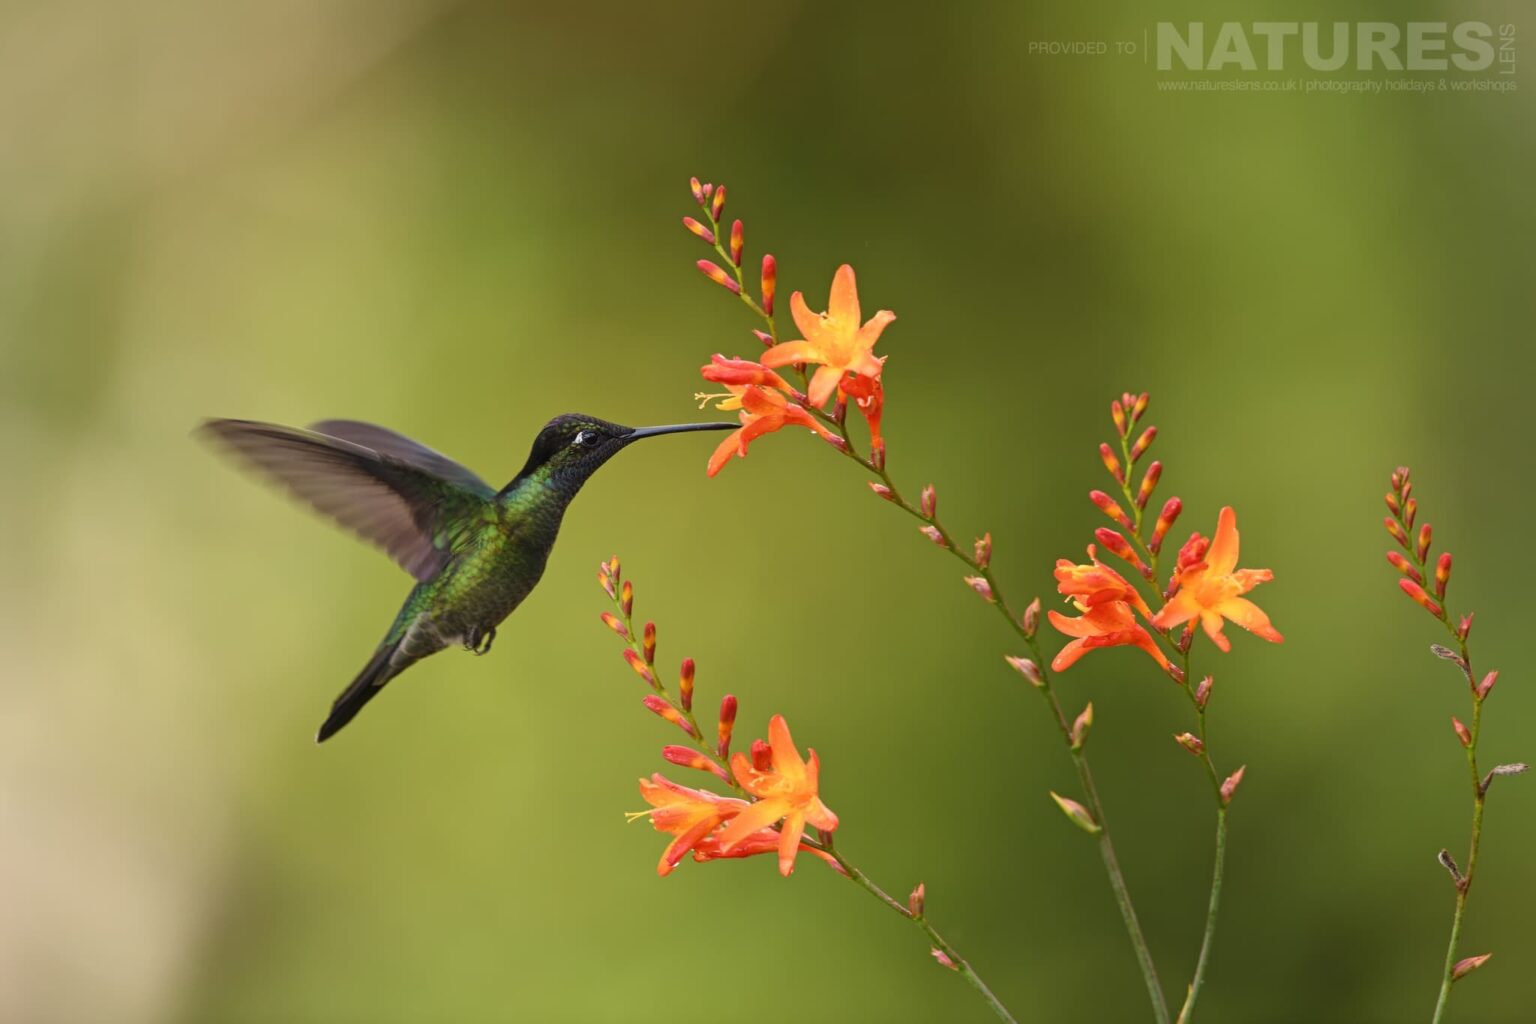 Hummingbirds are amongst the other species that we will be able to capture images of - which can be photographed during the NaturesLens Quetzals & Other Iconic Wildlife of Costa Rica photography holiday